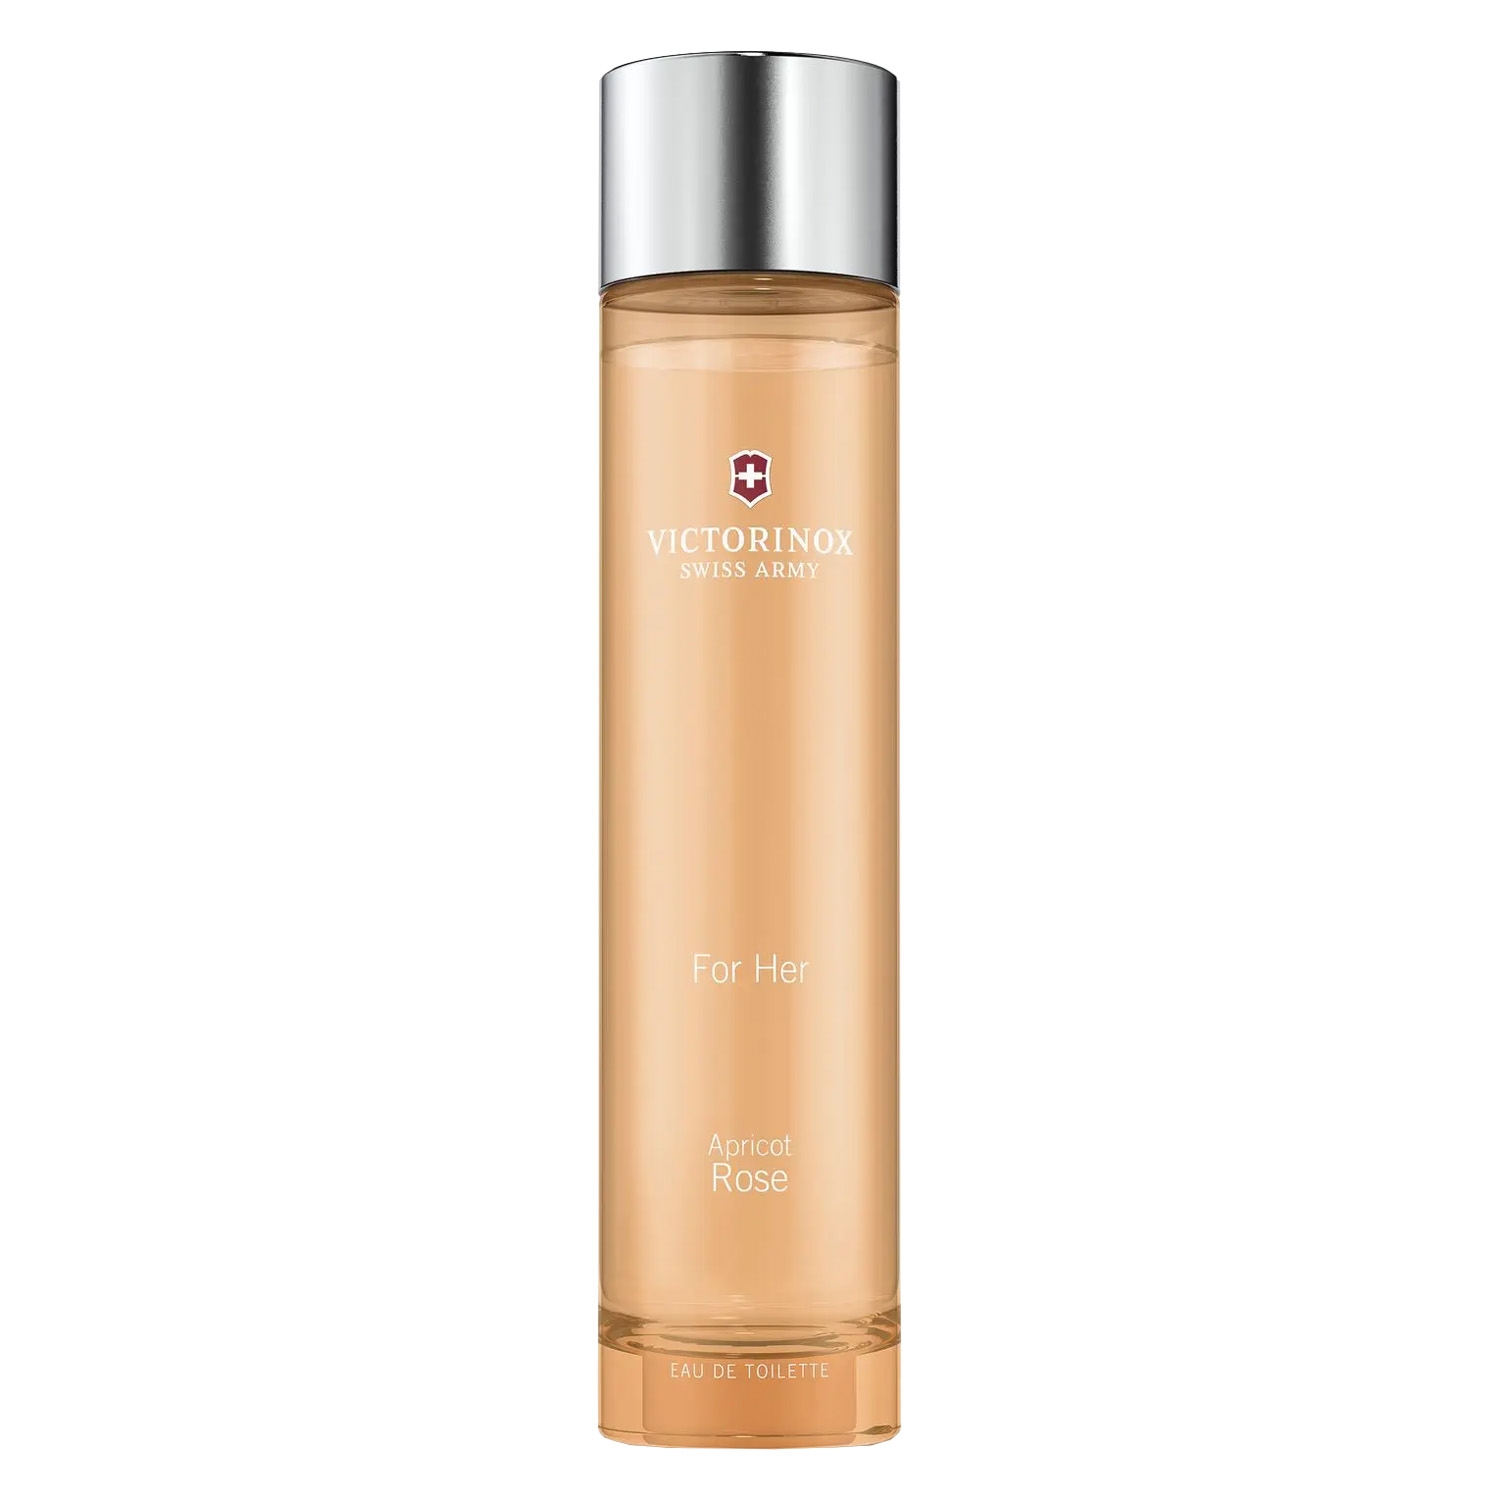 Product image from Victorinox Swiss Army - For Her Apricot Rose Eau de Toilette